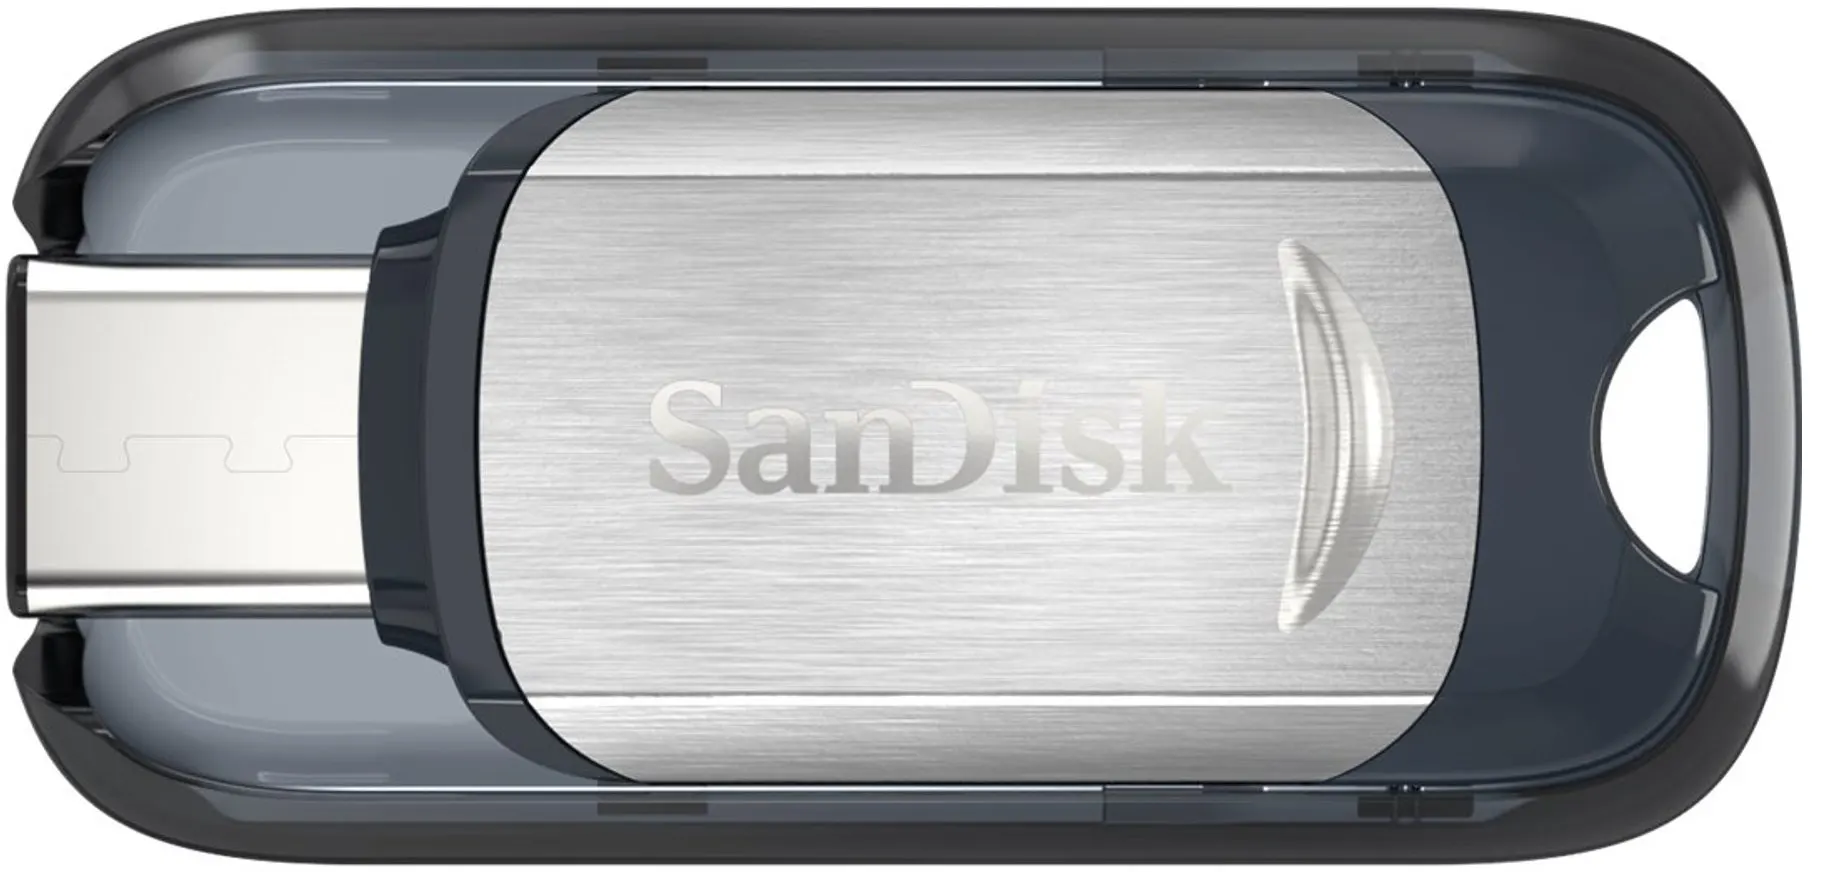 SanDisk Ultra Flash Memory, 16GB, Type-C, Silver, SDCZ450-016G-G46